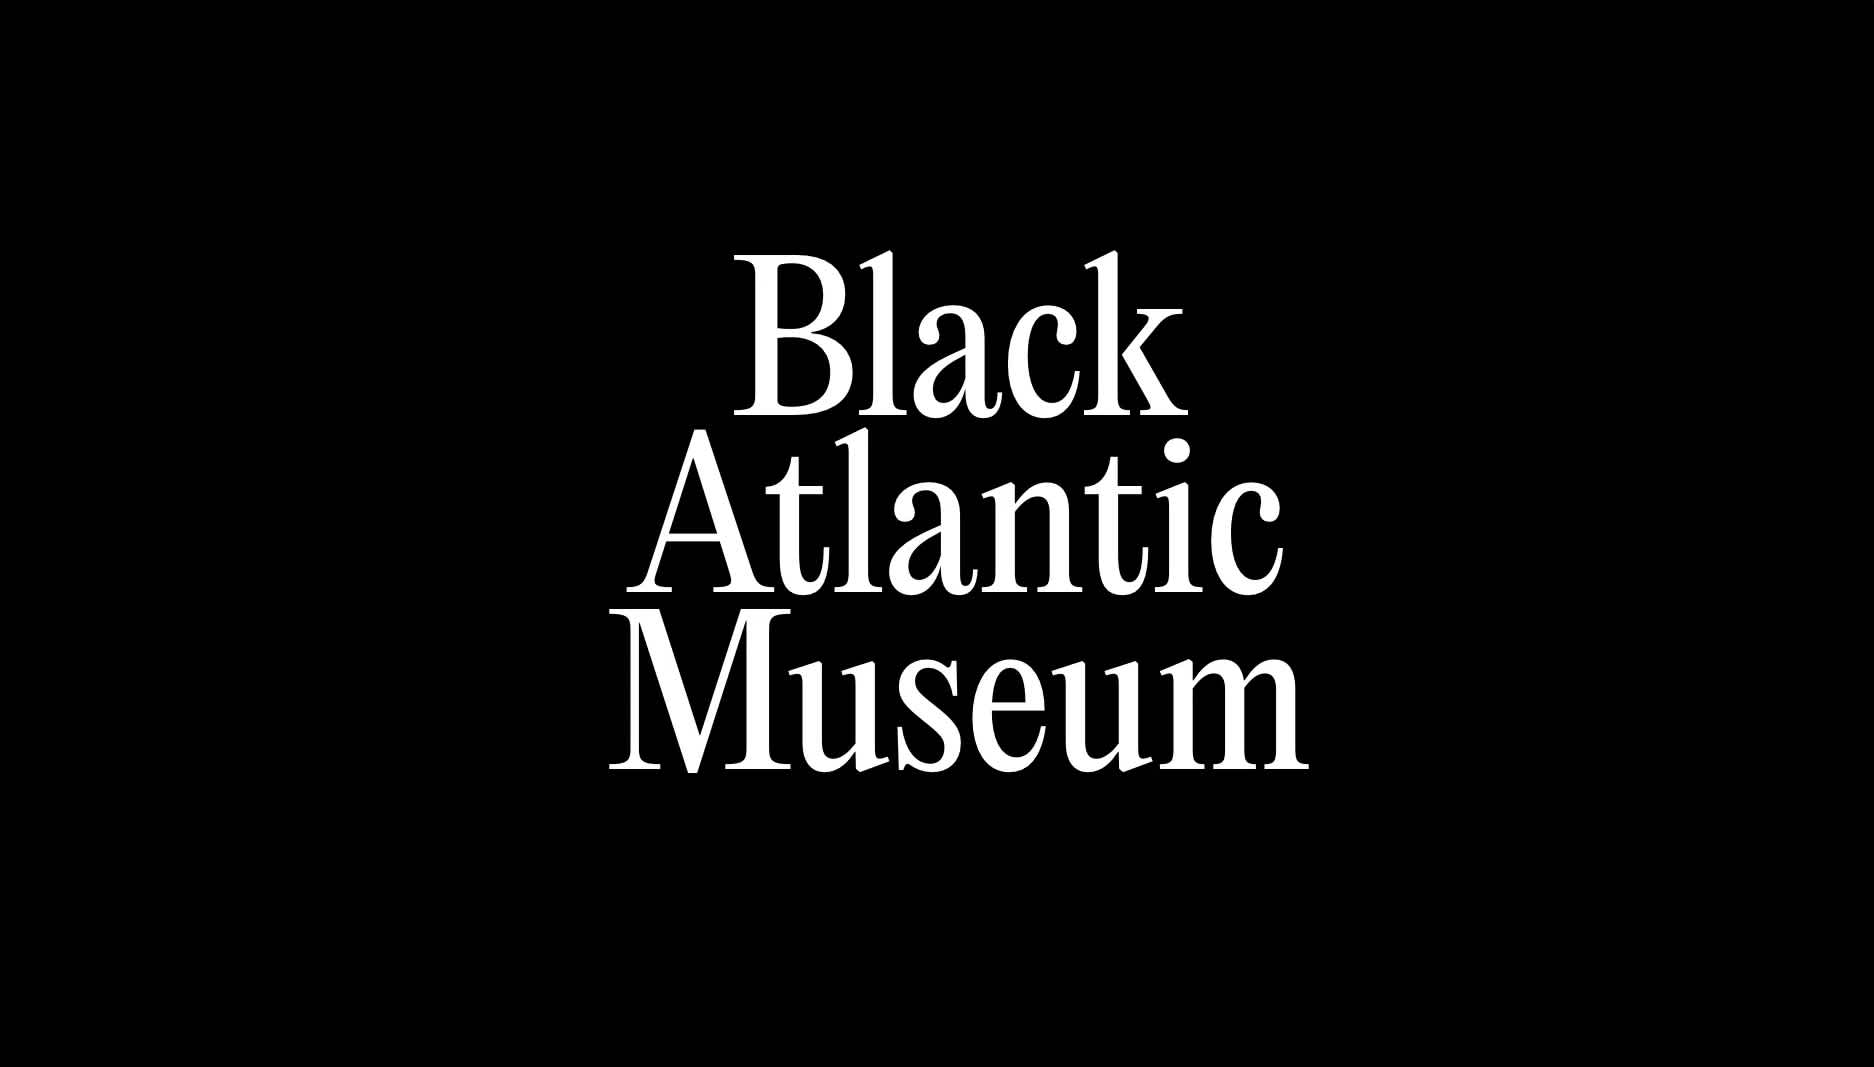 Black background with white serif text which reads, "Black Atlantic Museum".